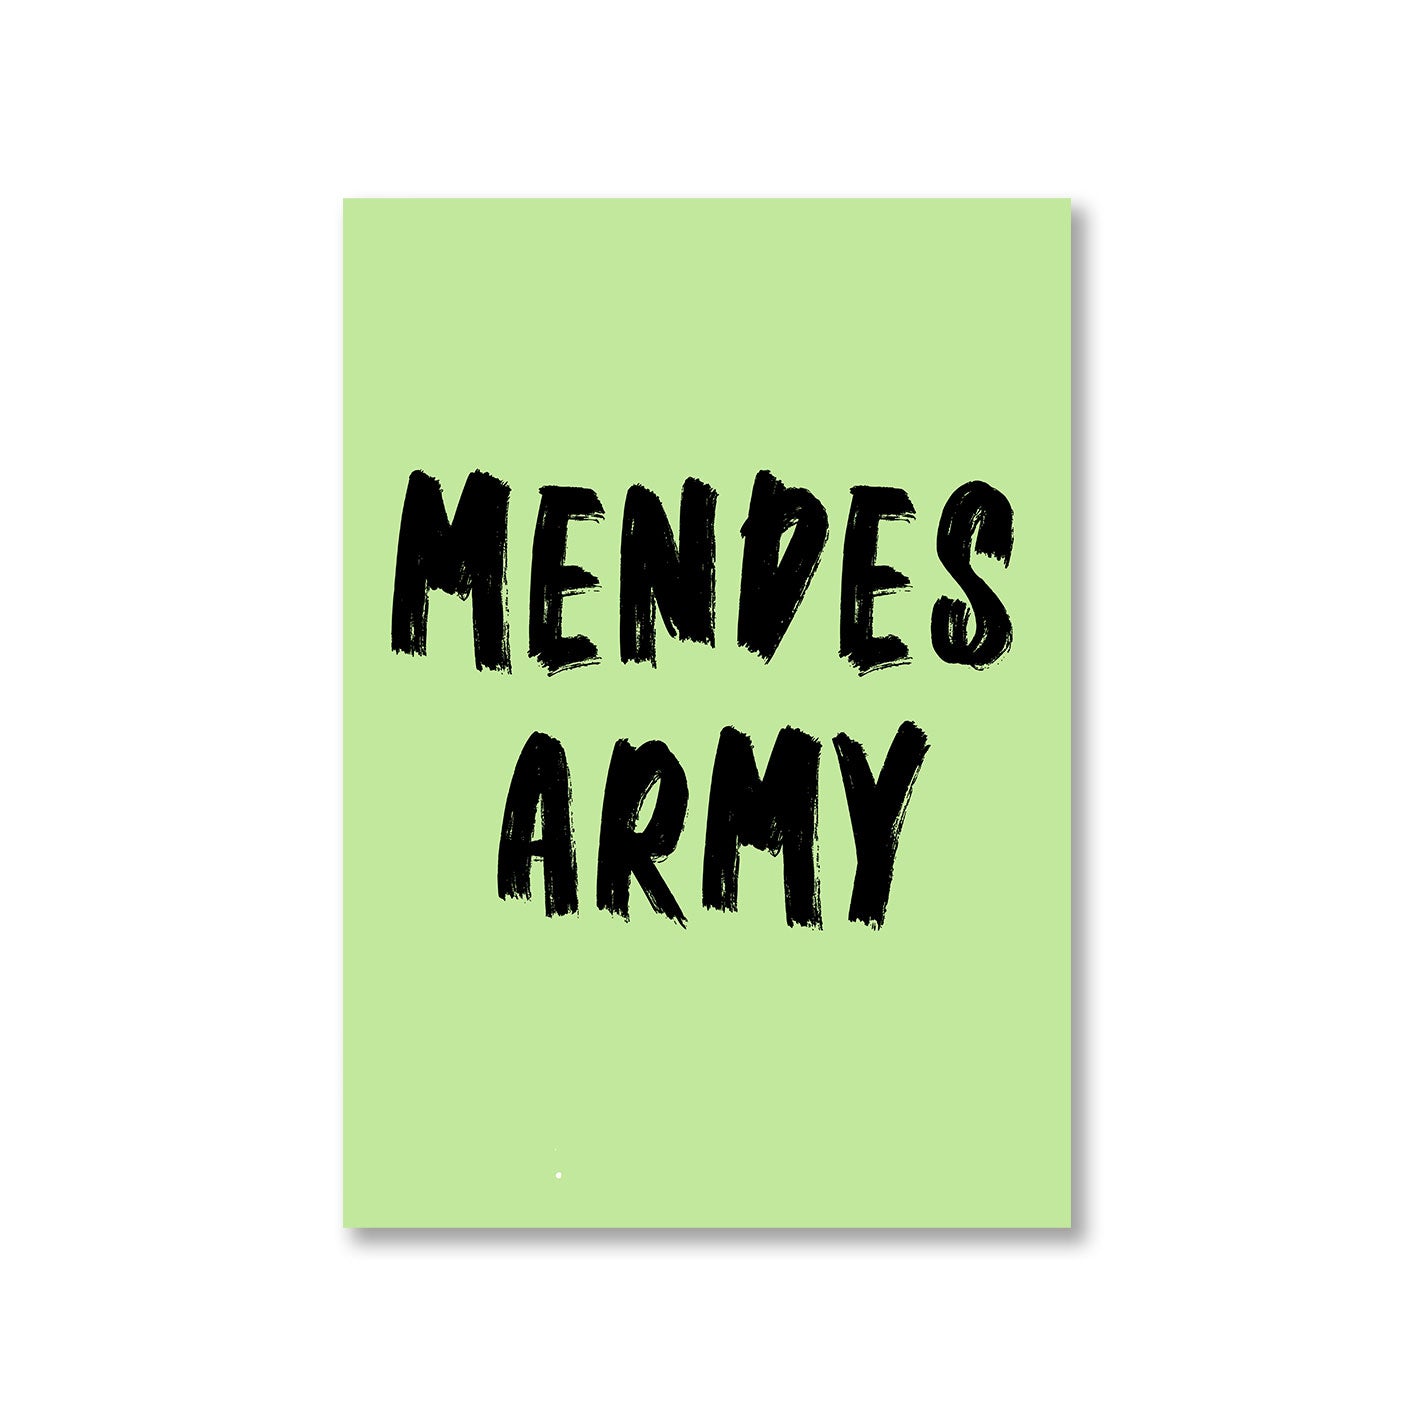 shawn mendes mendes army poster wall art buy online united states of america usa the banyan tee tbt a4